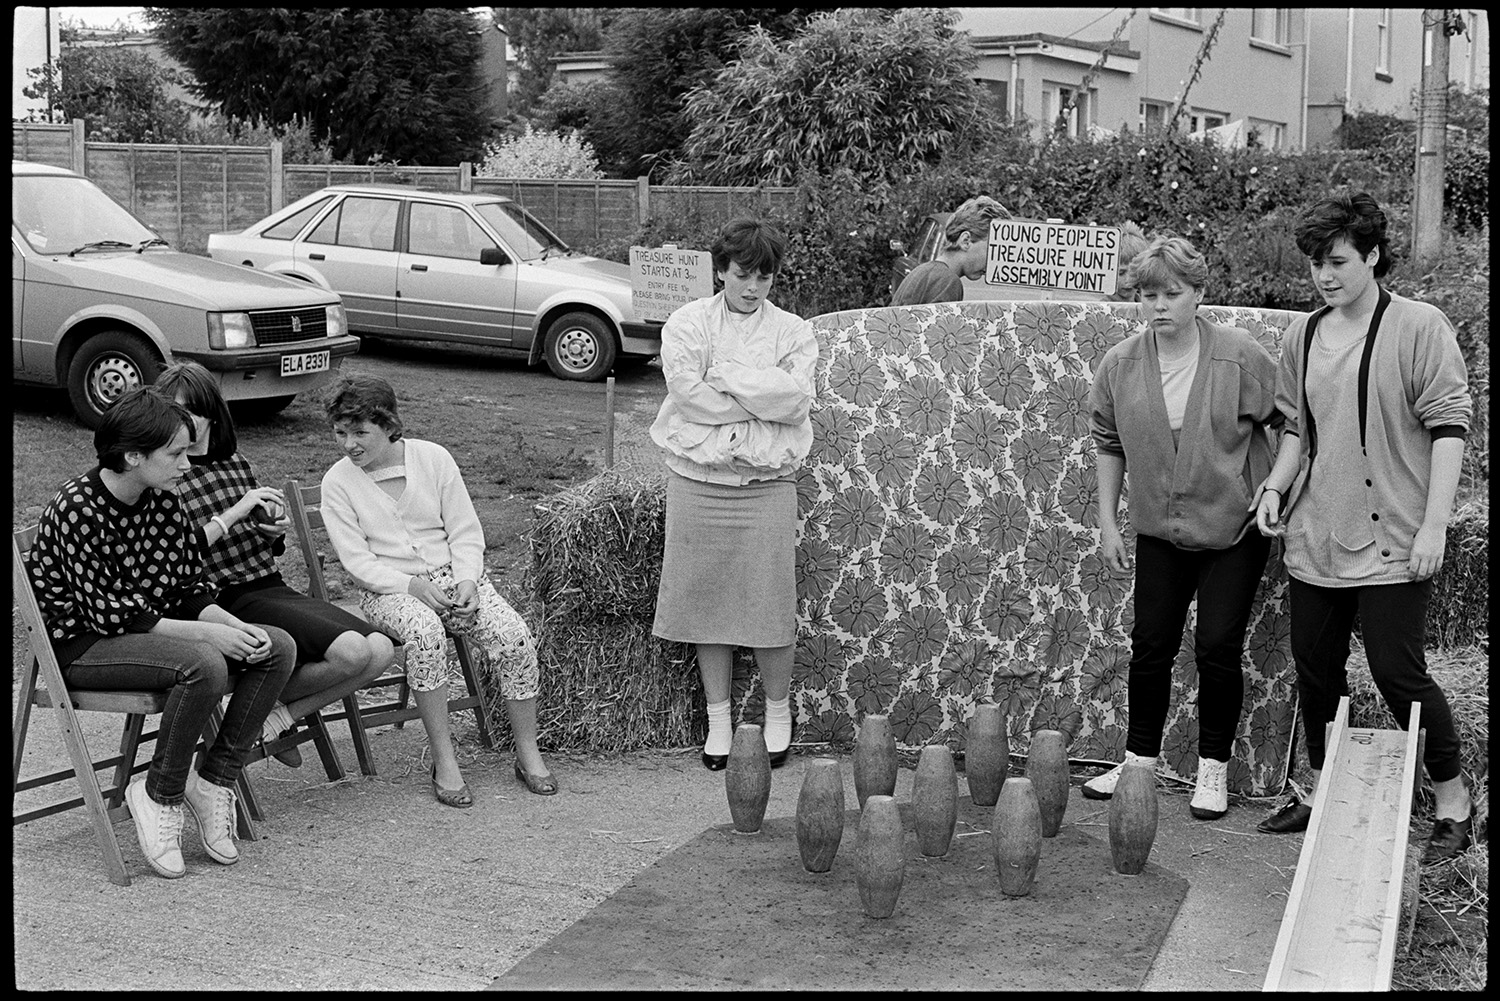 Teenage girls standing around the outdoor skittle alley at Dolton Flower Show. A mattress and straw bales are behind the skittles. Parked cars, signs for a treasure hunt. shrubs and houses are visible in the background.